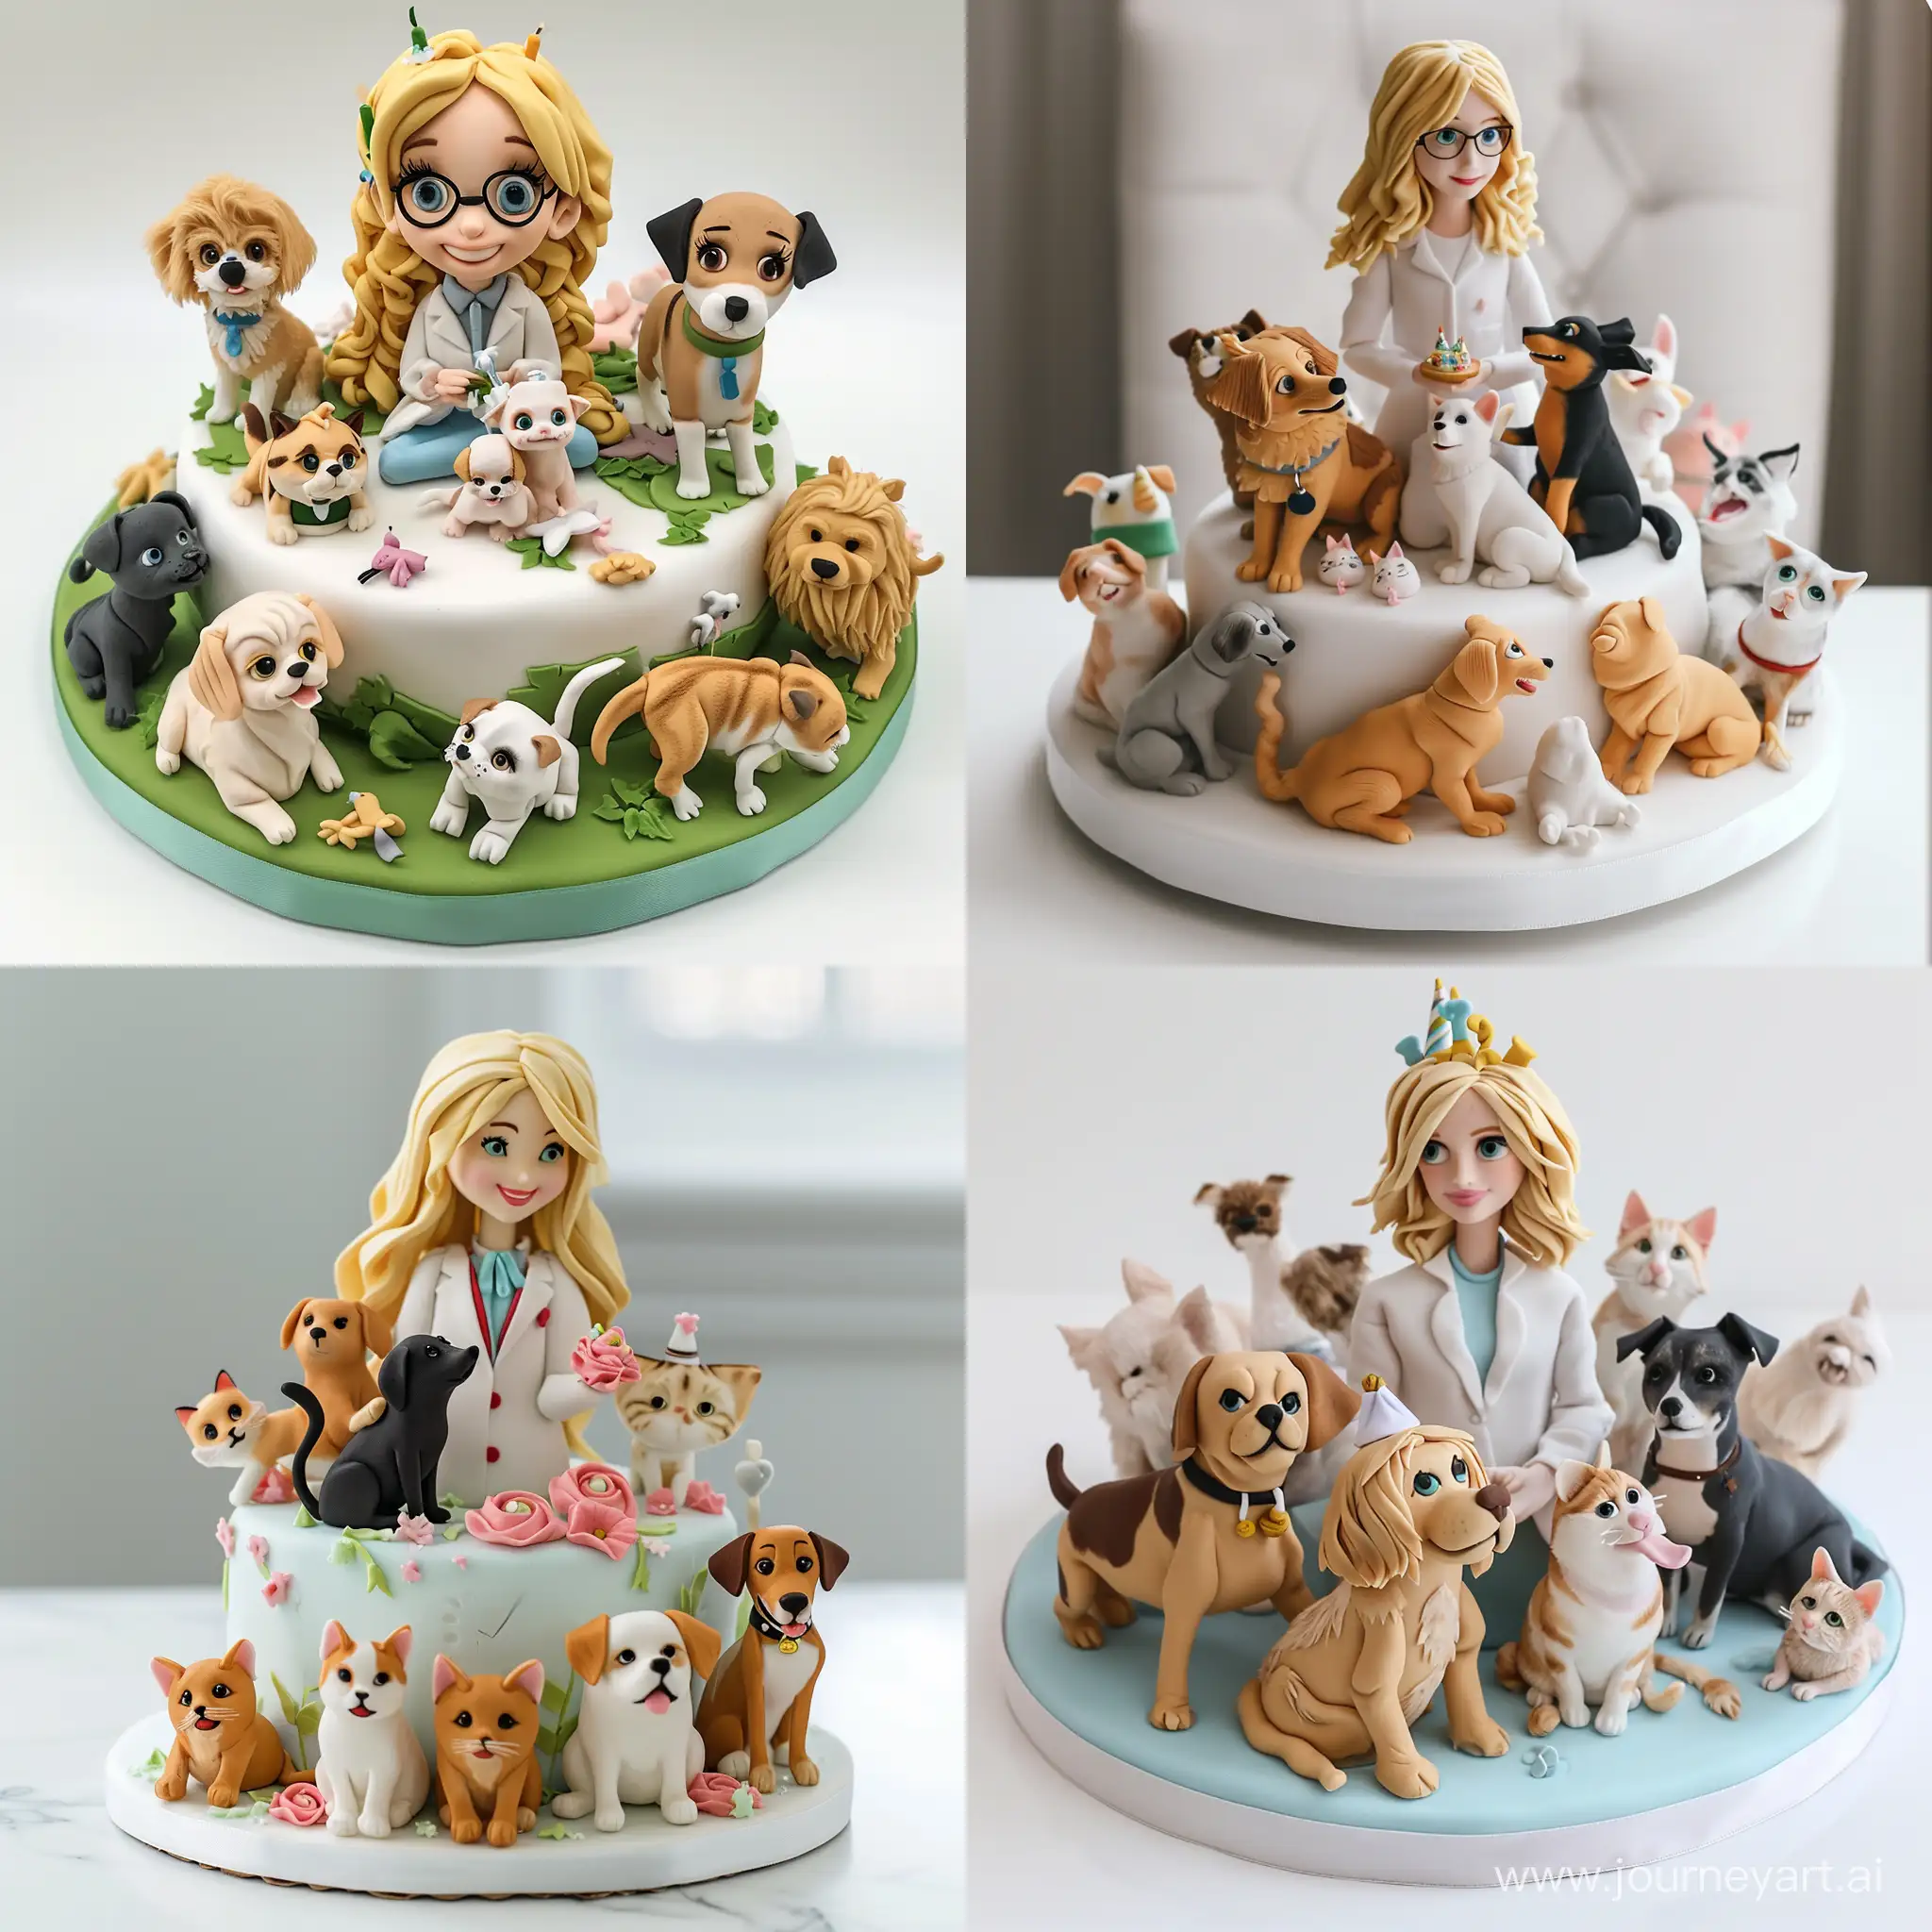 Happy birthday cake with a blonde pharmacyst named sorina and cats and dogs